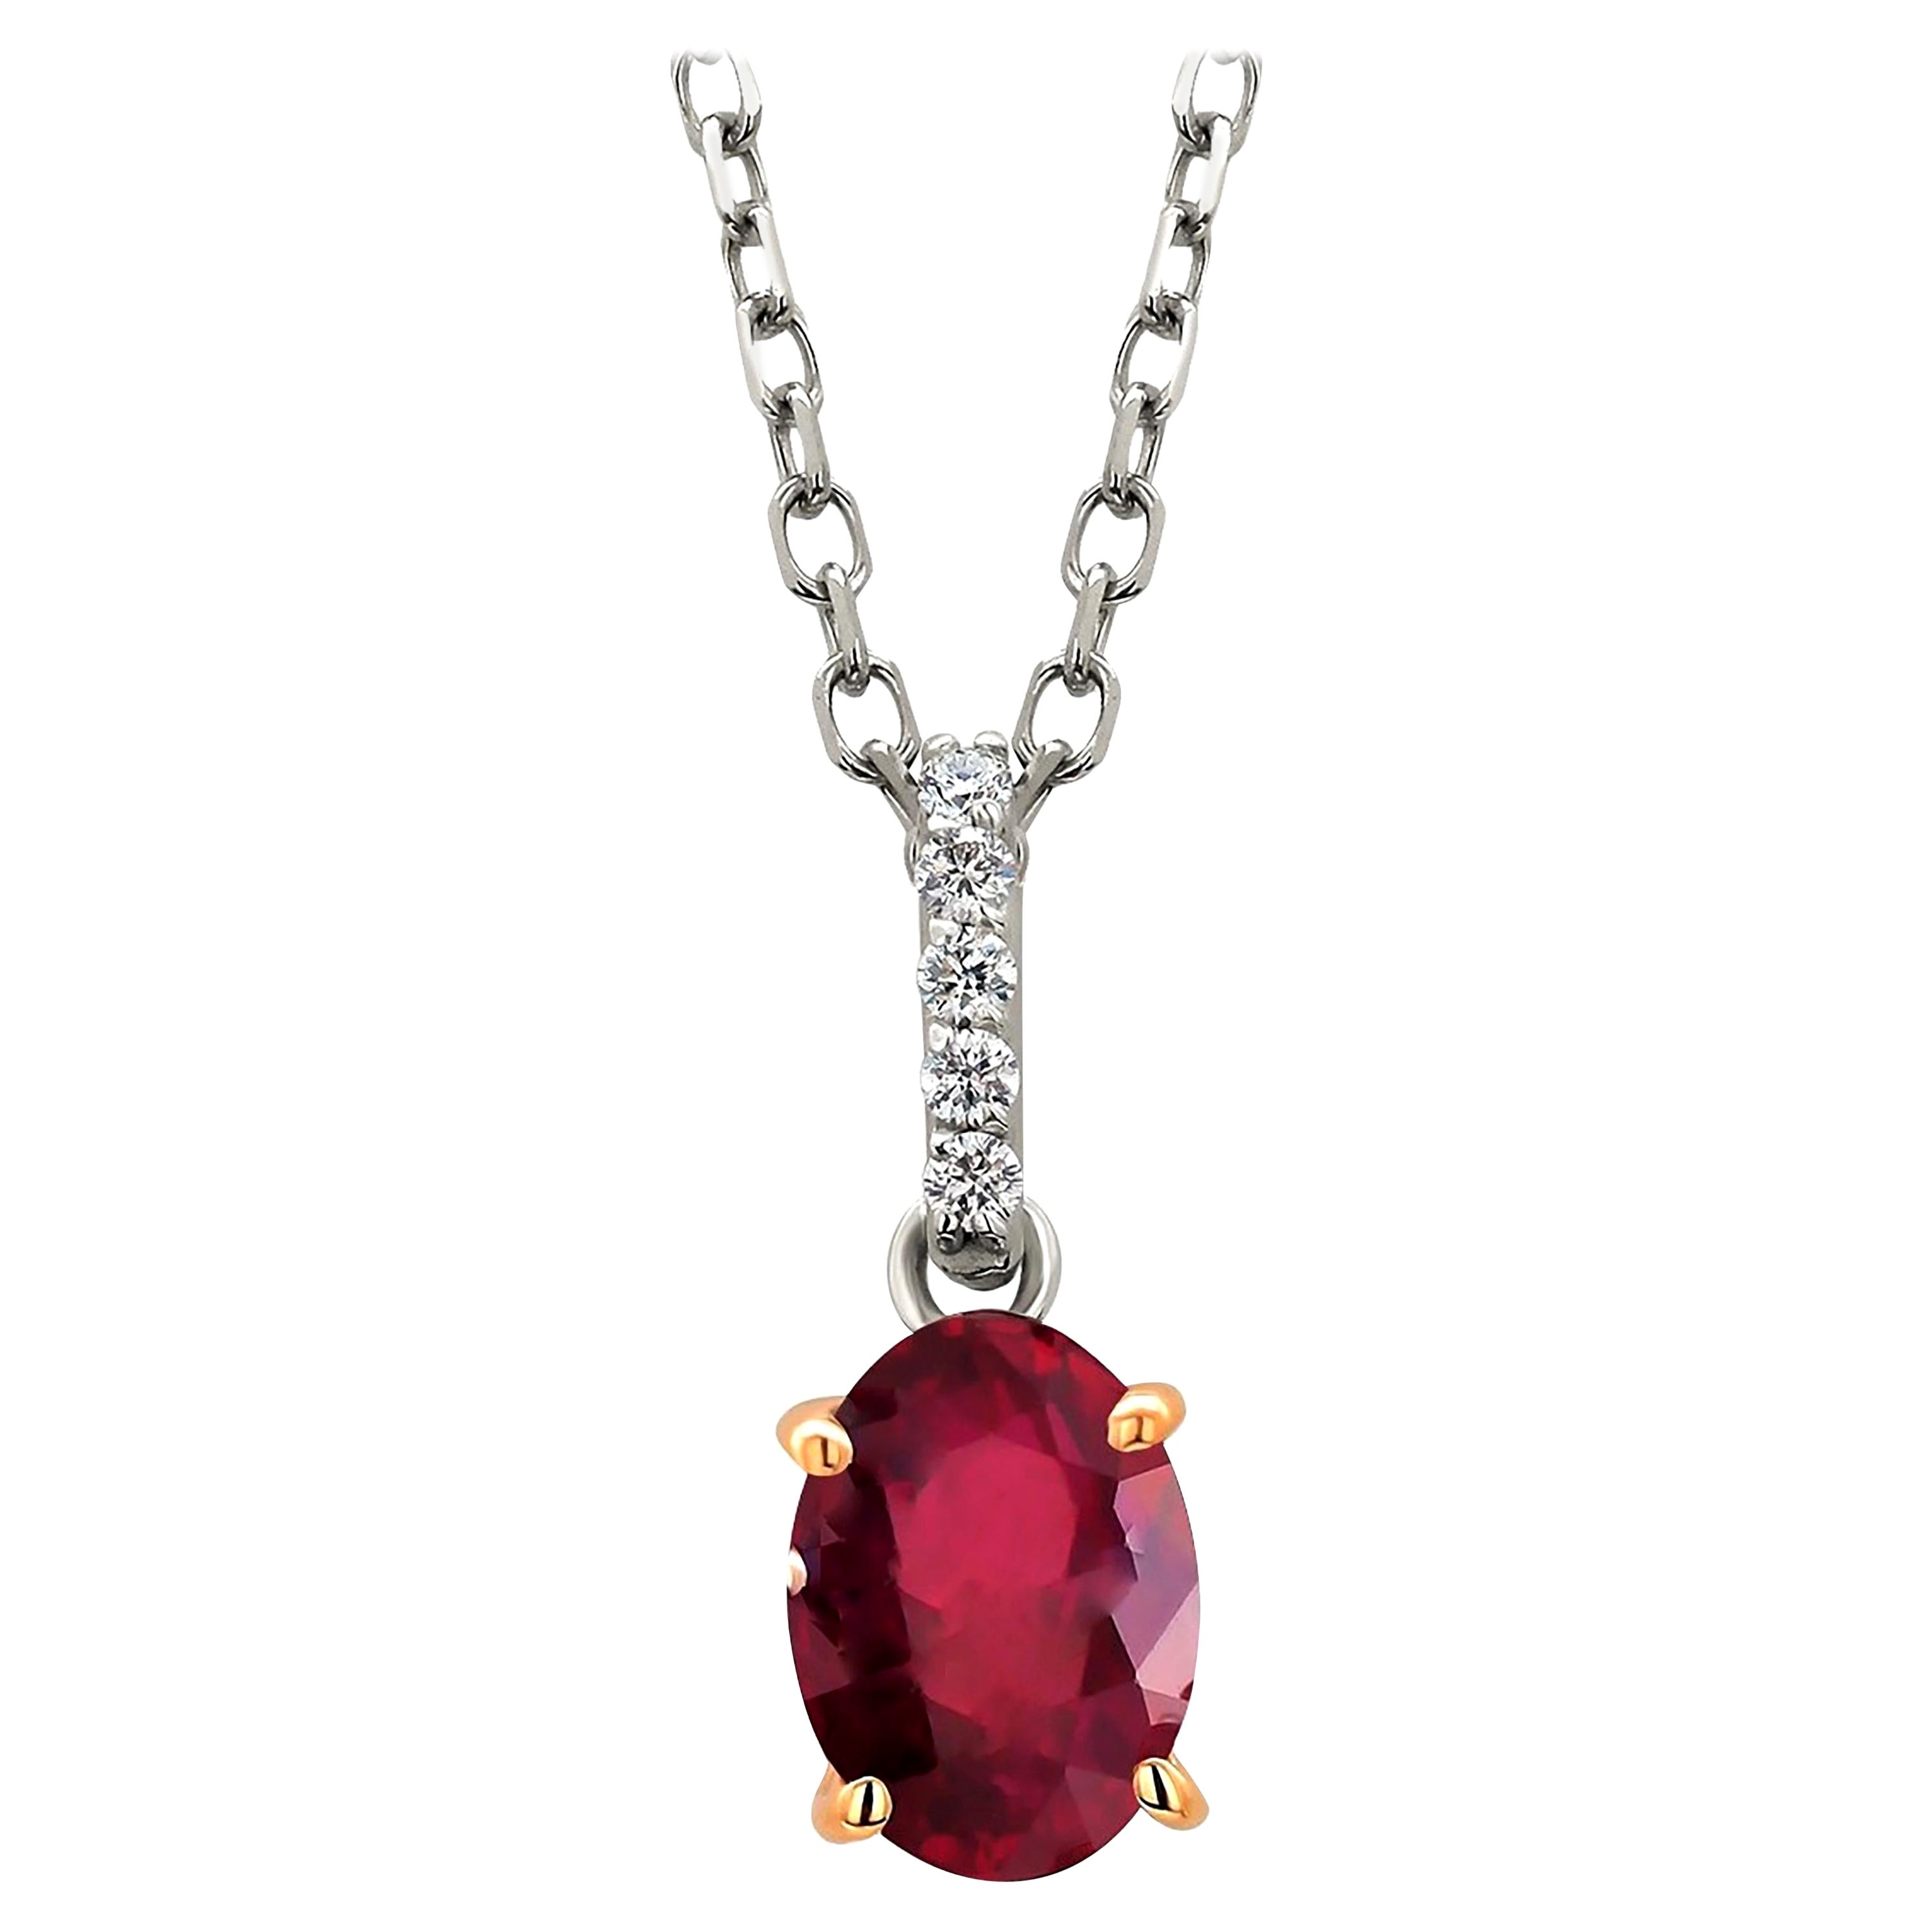 Oval Burma Red Ruby with Diamond Bail White and Yellow Gold Pendant Necklace